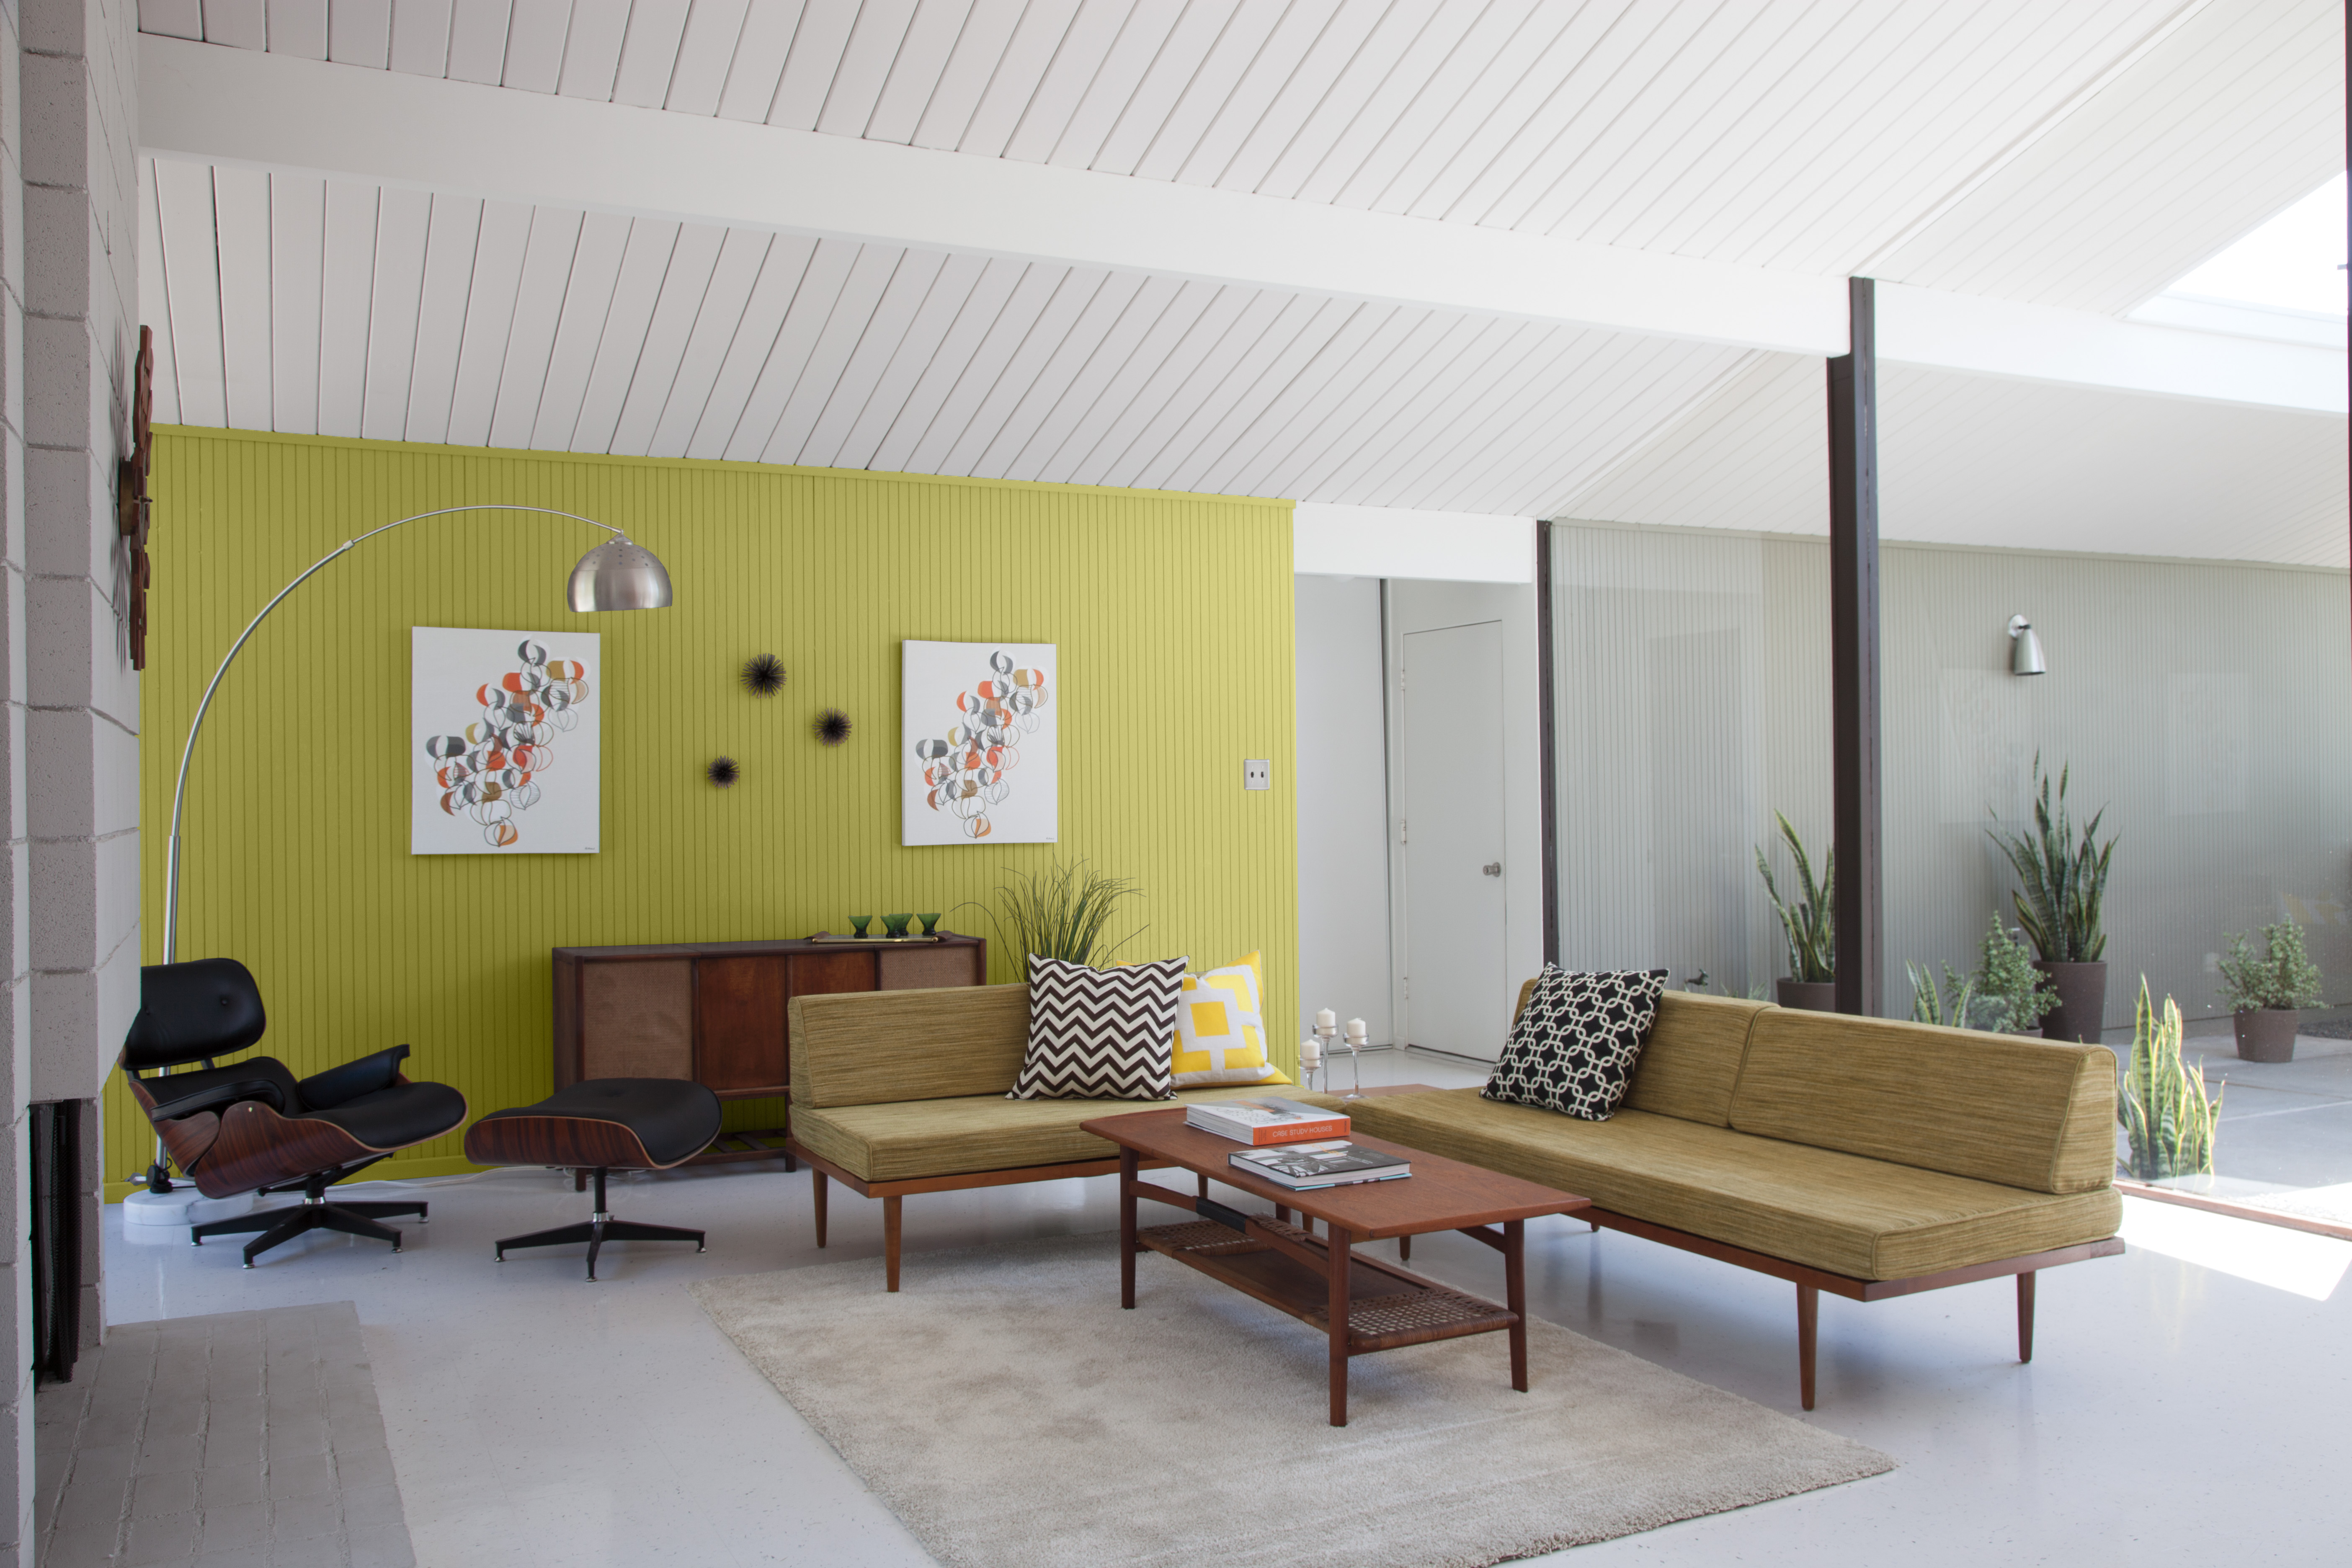 A mid-century modern living space with an accent wall painted in a vibrant green colour